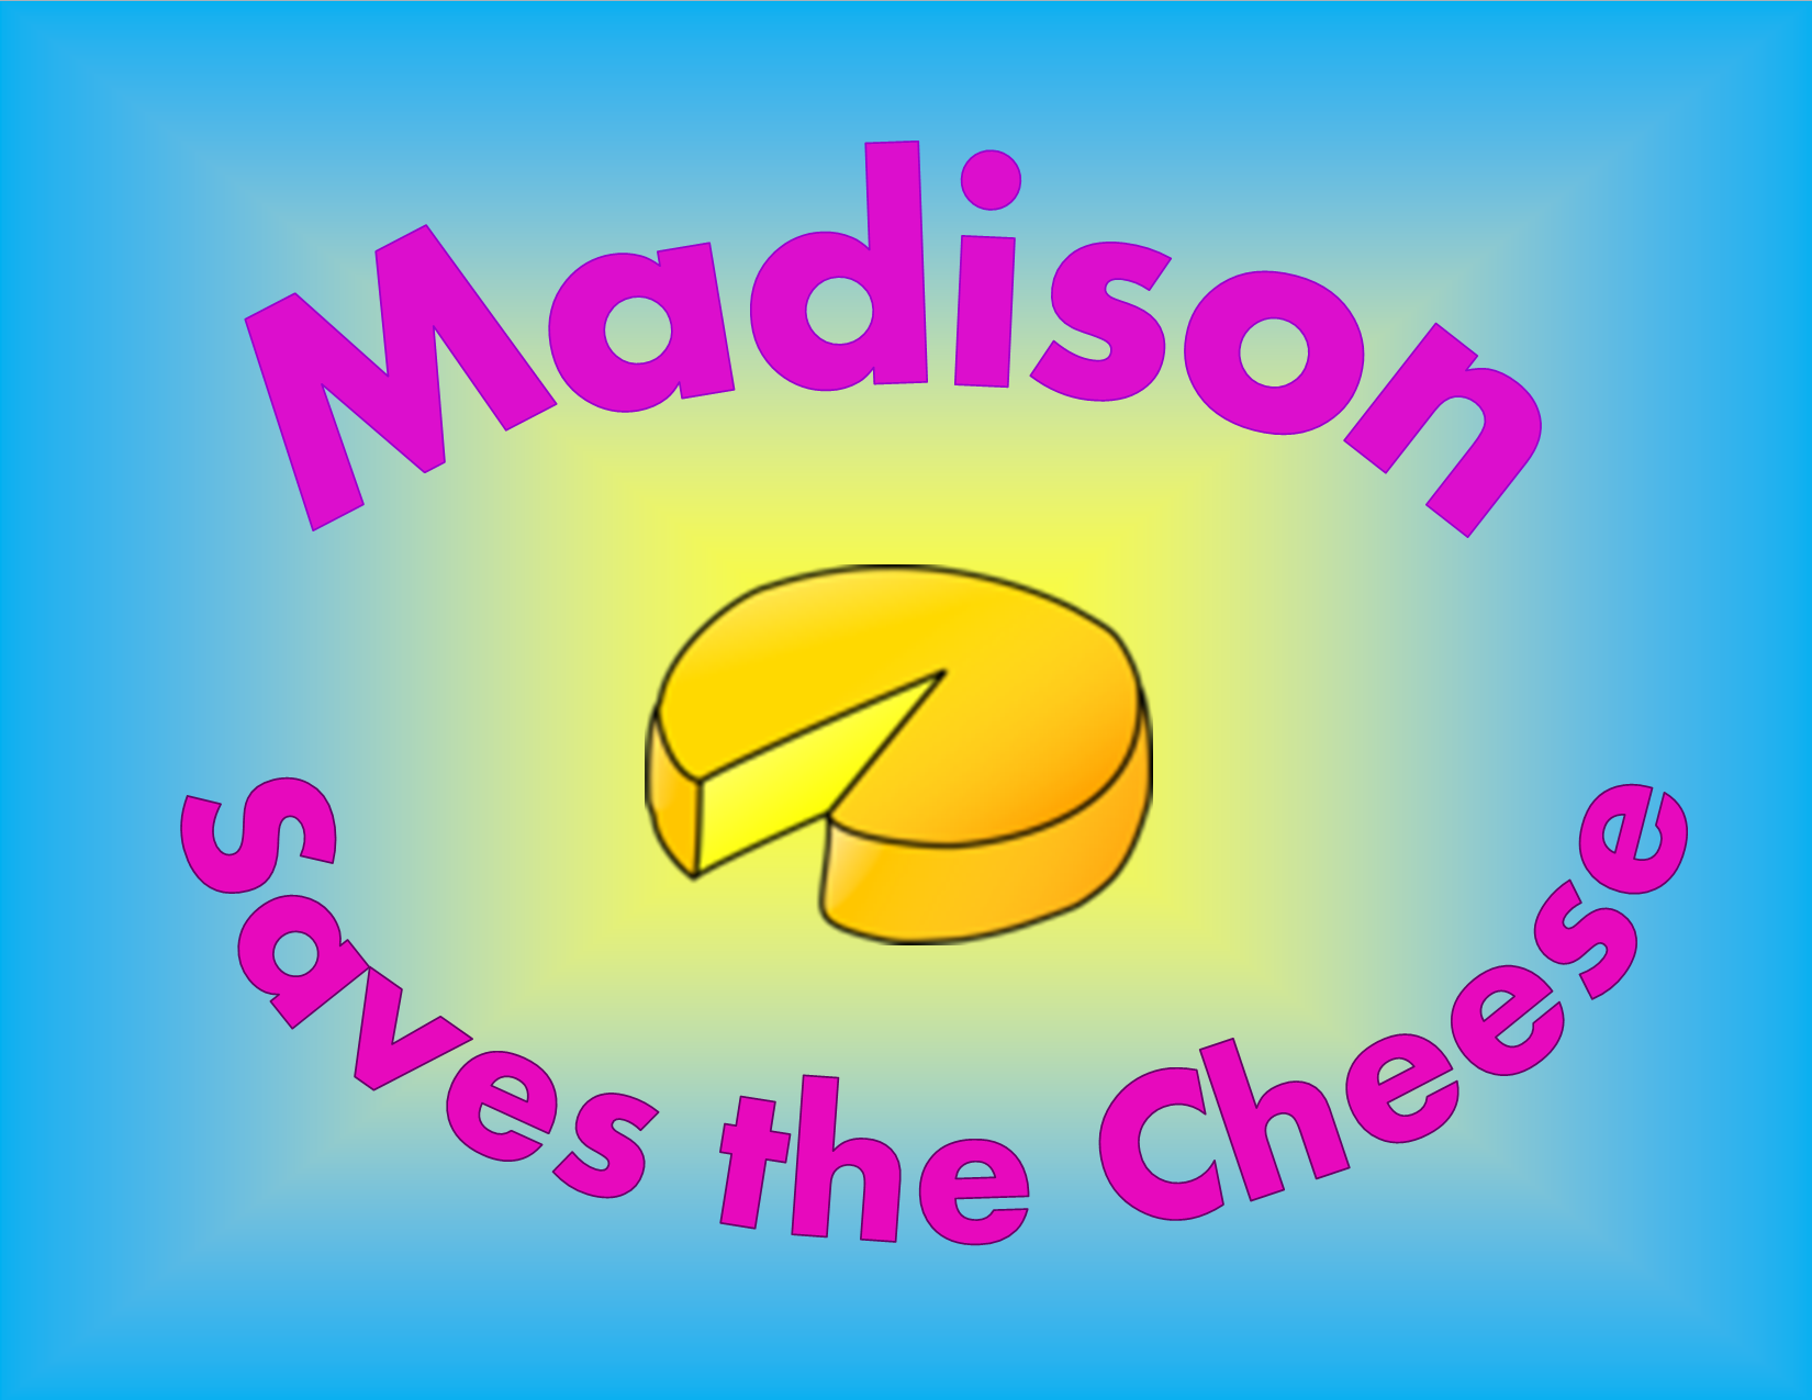 G33kpod Presents: Madison Saves the Cheese Episode 1: It's Just so Amazing!